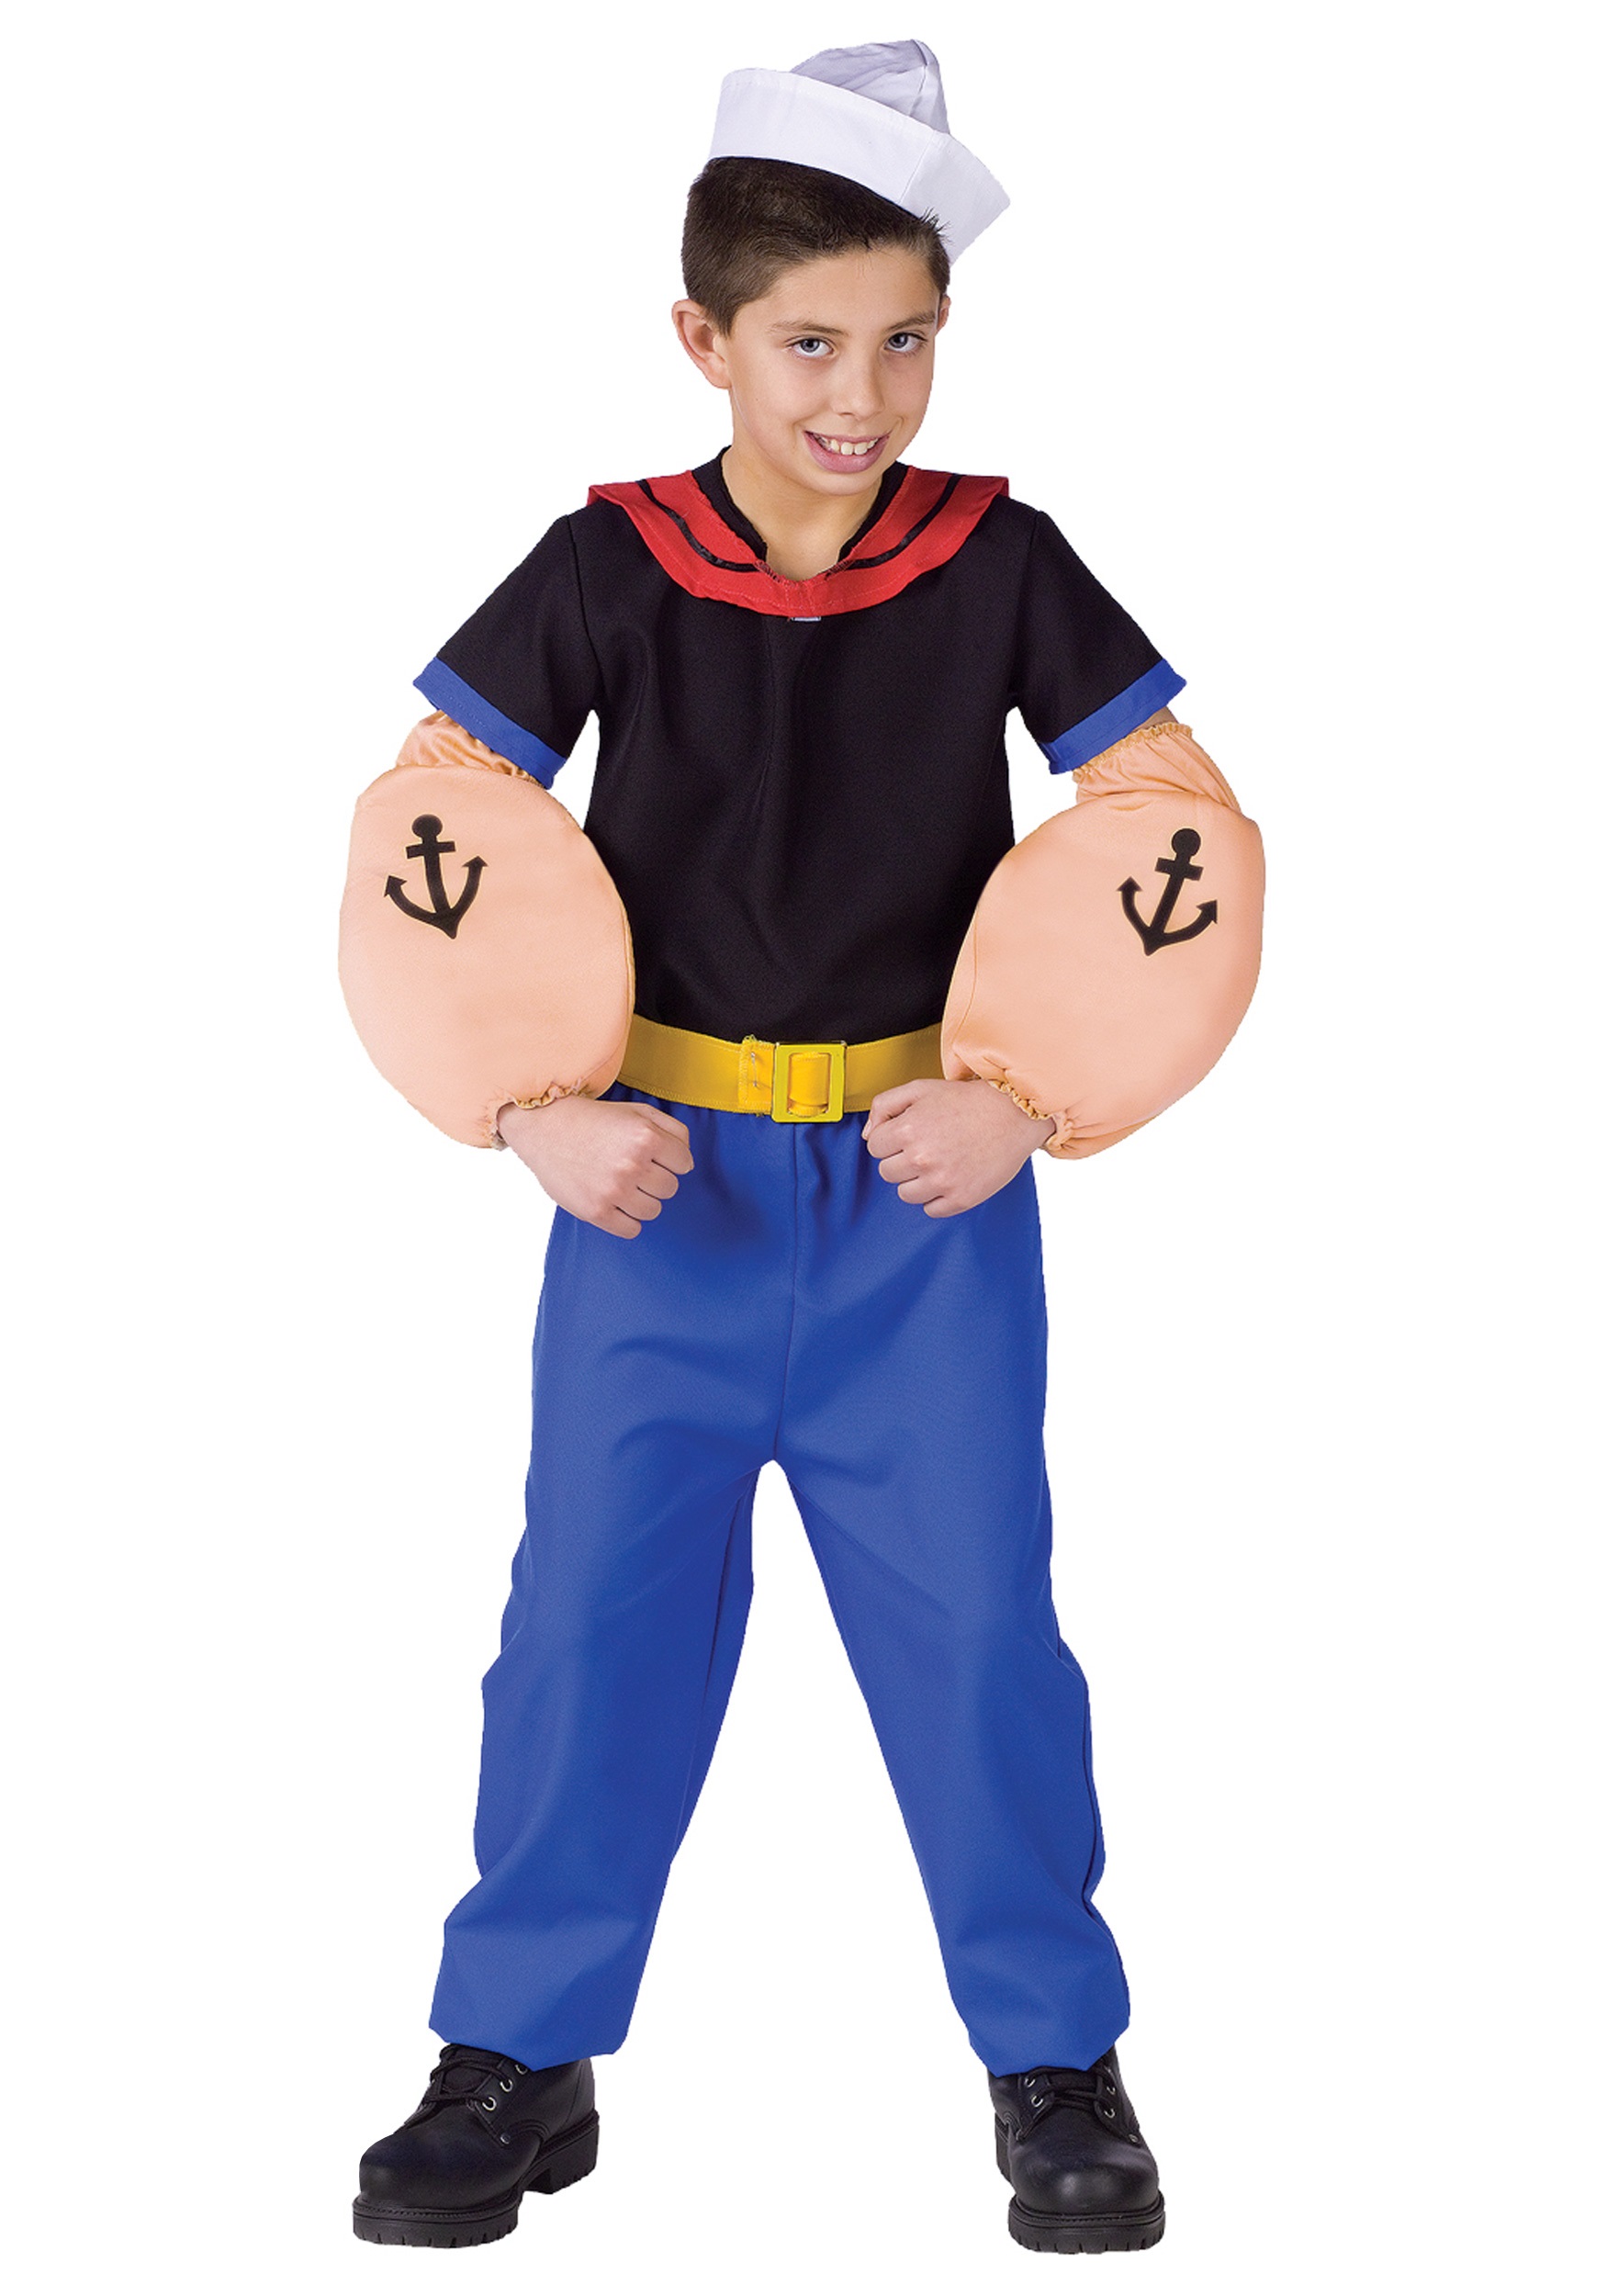 This Child Popeye Costume will turn you into the easily recognizable Popeye ...